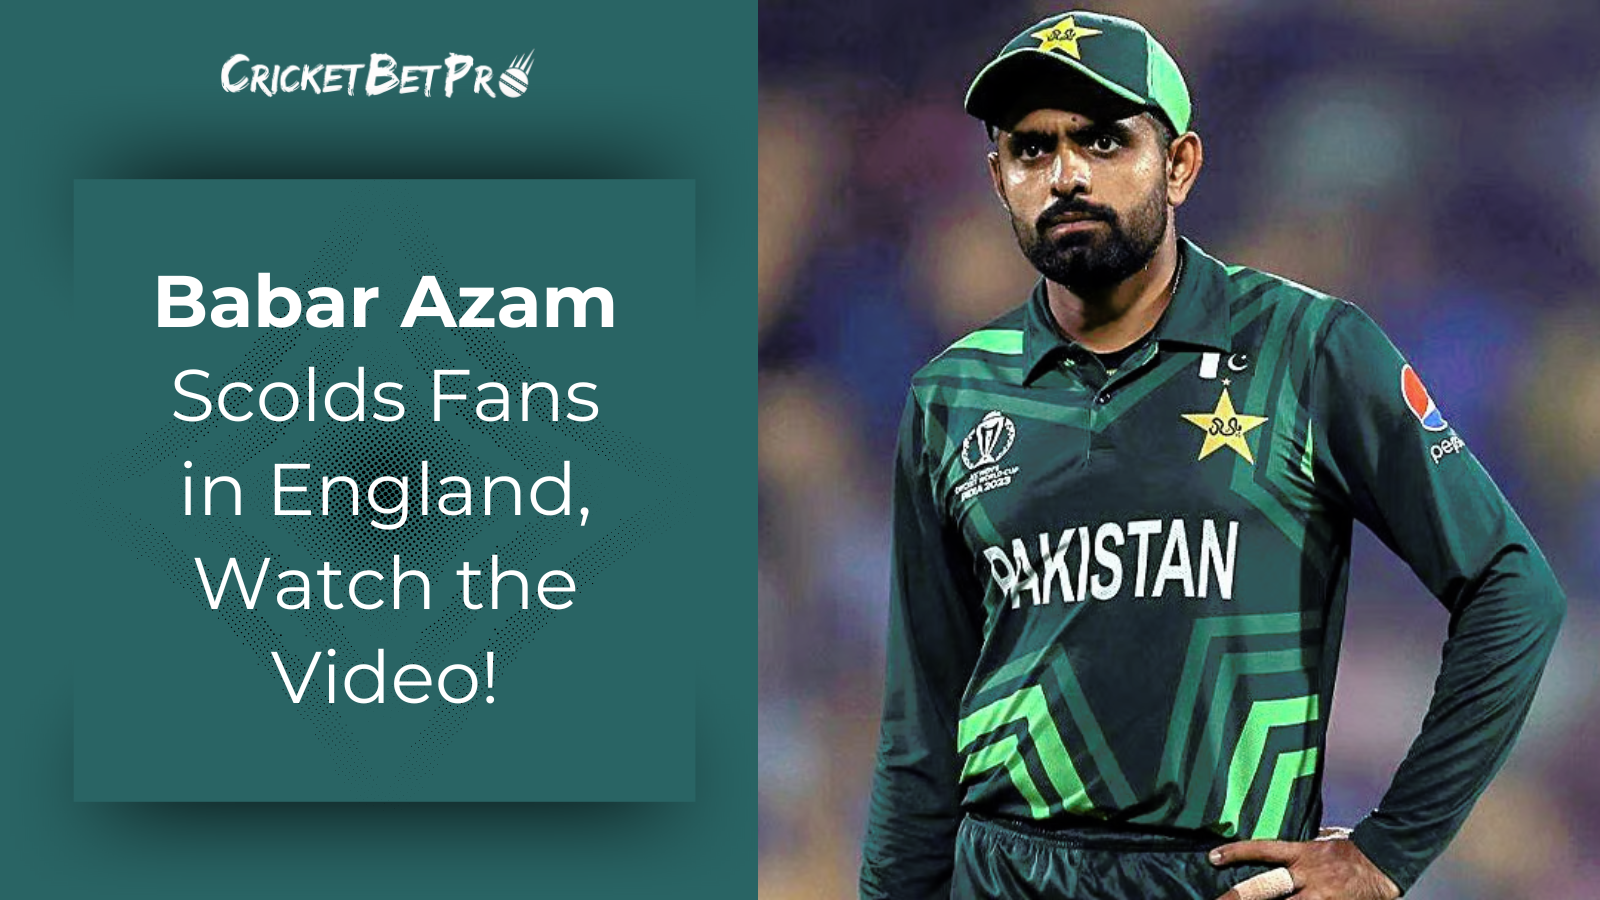 Babar-Azam-Scolds-Fans-in-England-Watch-the-Video.png